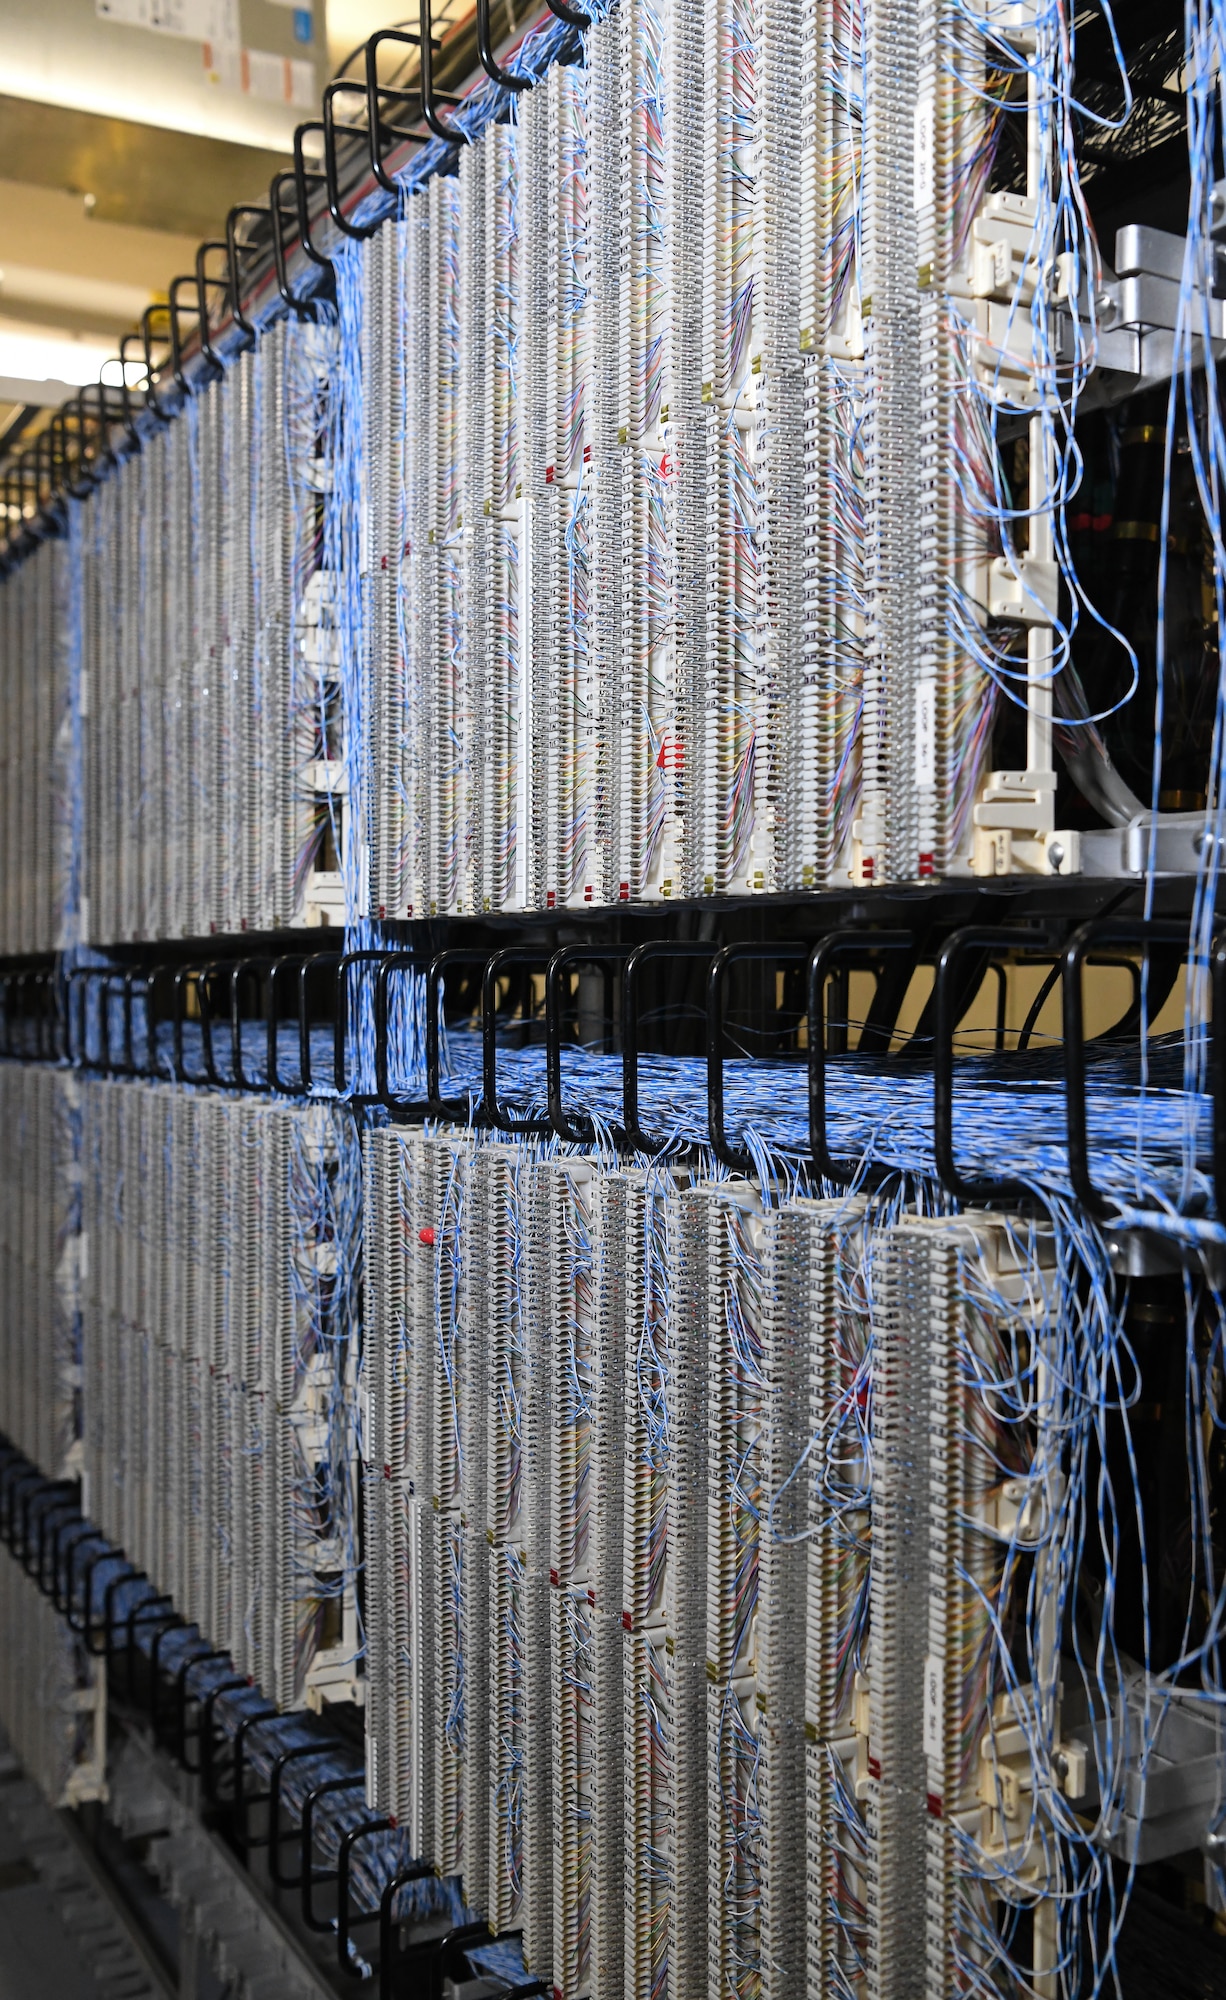 The main distribution frame of punch-down blocks, seen here Dec. 12, 2019, houses the connections of telephone lines at Arnold Air Force Base, Tenn. in the Telephone Switchroom. (U.S. Air Force photo by Jill Pickett)